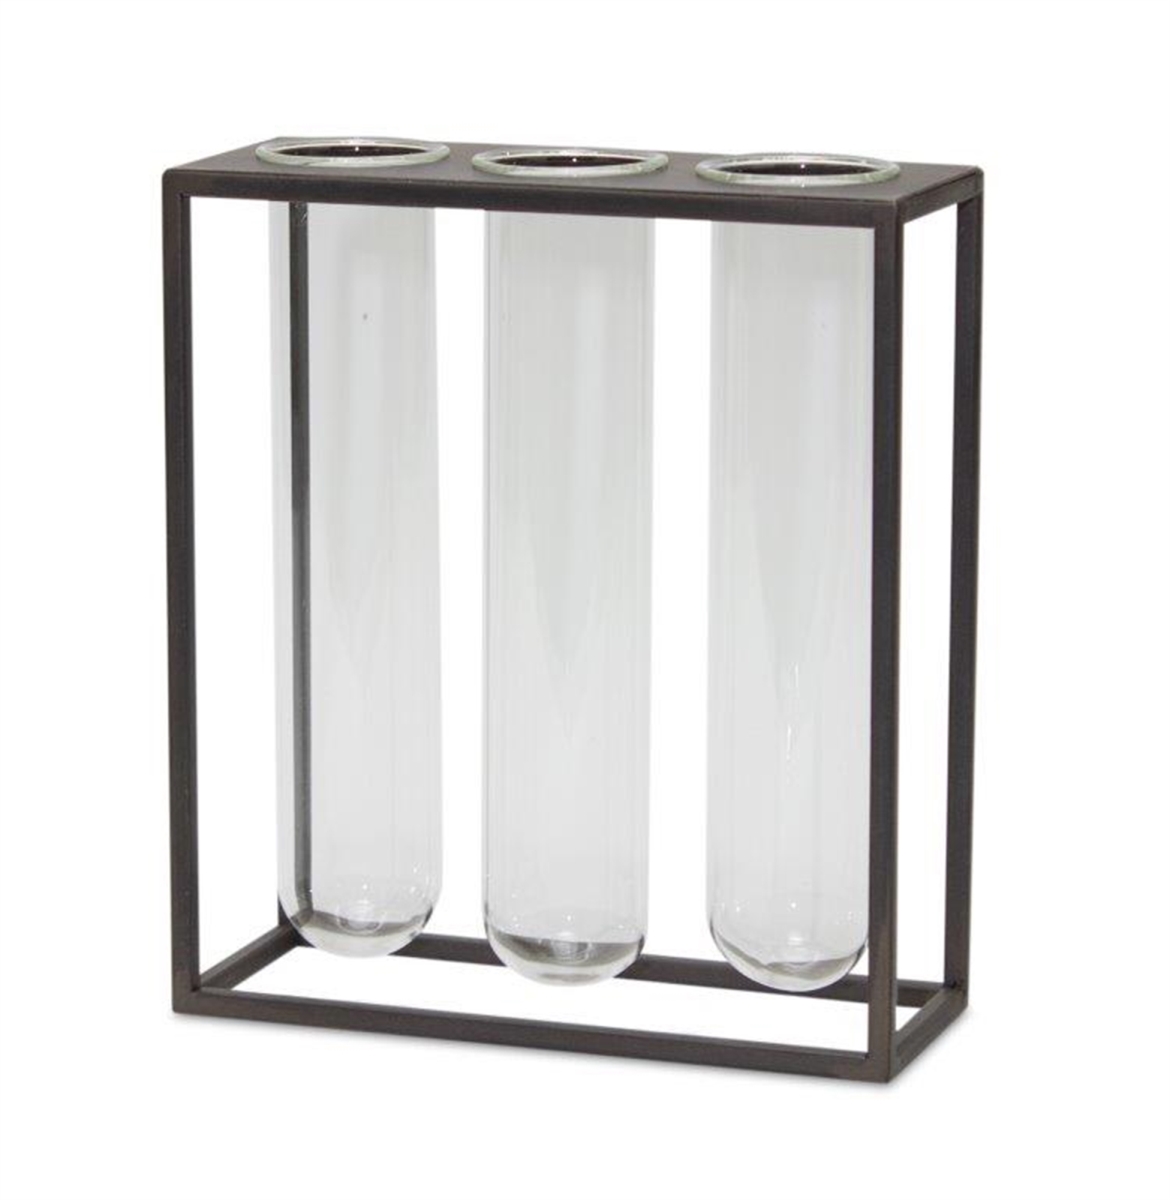 UPC 746427820516 product image for 82051 8 x 9 in. Iron & Glass Stand Vases, Brown & Glass - Set of 4 | upcitemdb.com